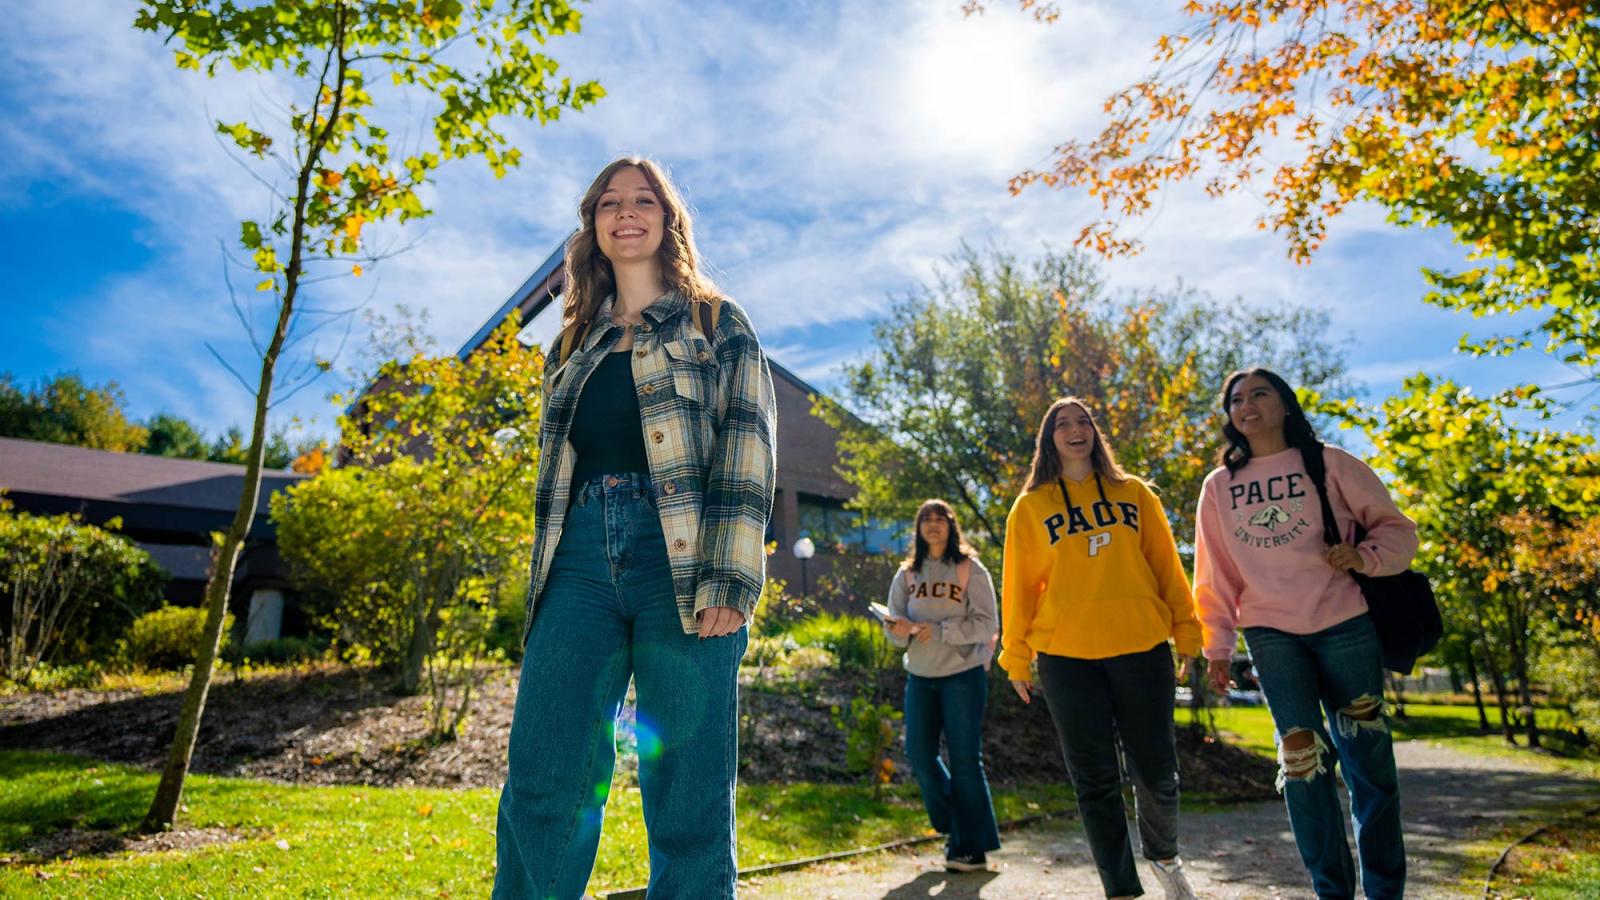 Pace students walking on Pleasantville Campus